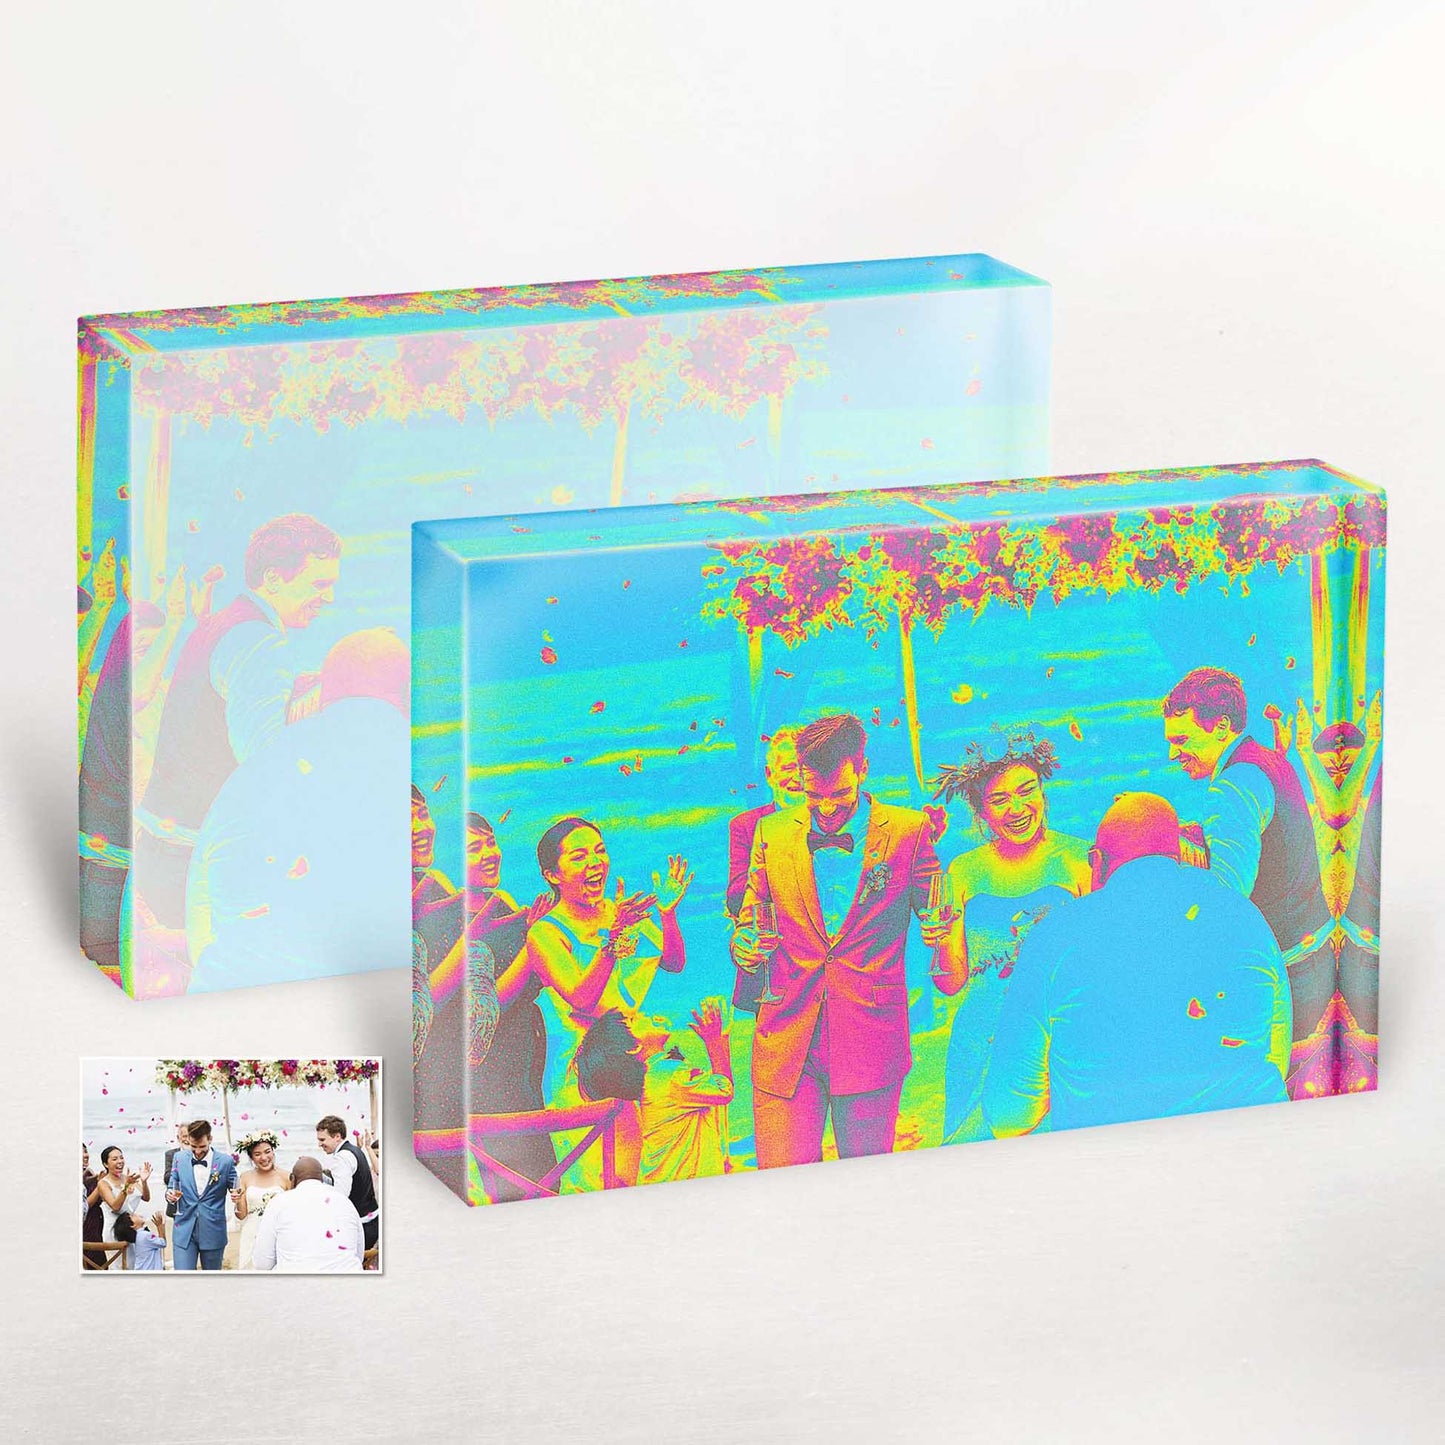 Experience a burst of visual energy with this Acid Trip Effect Acrylic Block Photo, personalised from your photo. The vibrant and psychedelic colors create a one-of-a-kind artwork that is sure to make a bold statement in any room